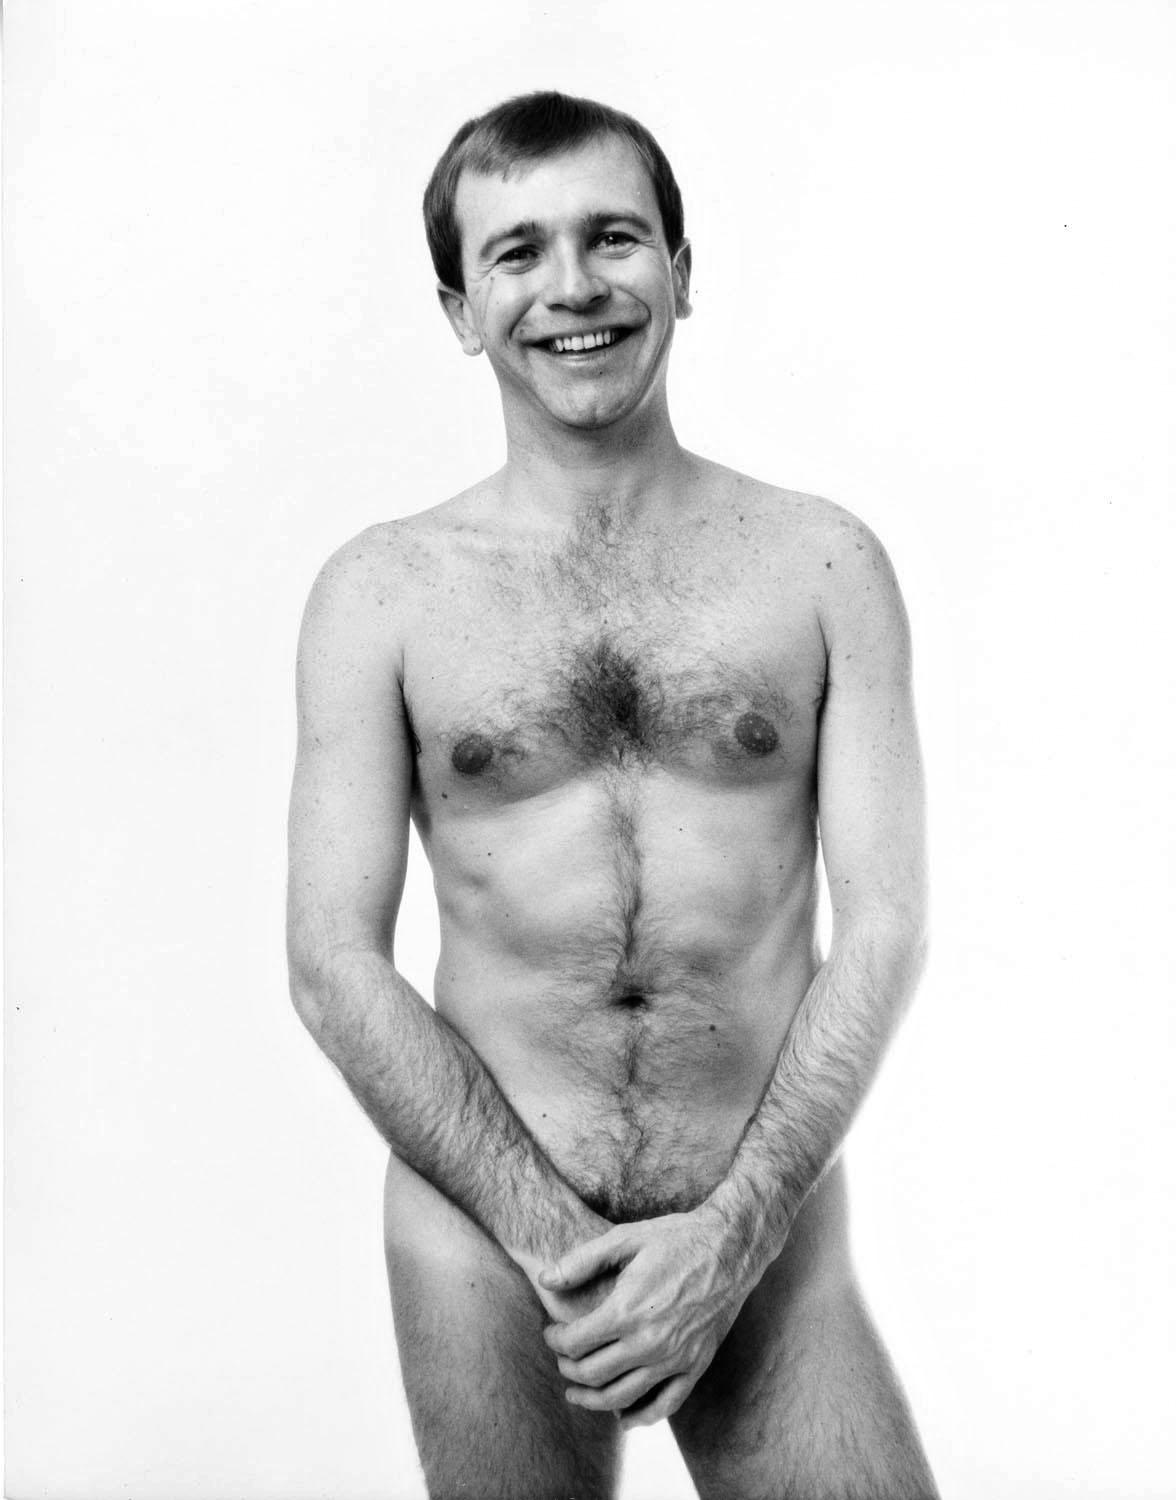  Tony award-winning playwright Terrence McNally nude for After Dark LGBTQ+ Pride